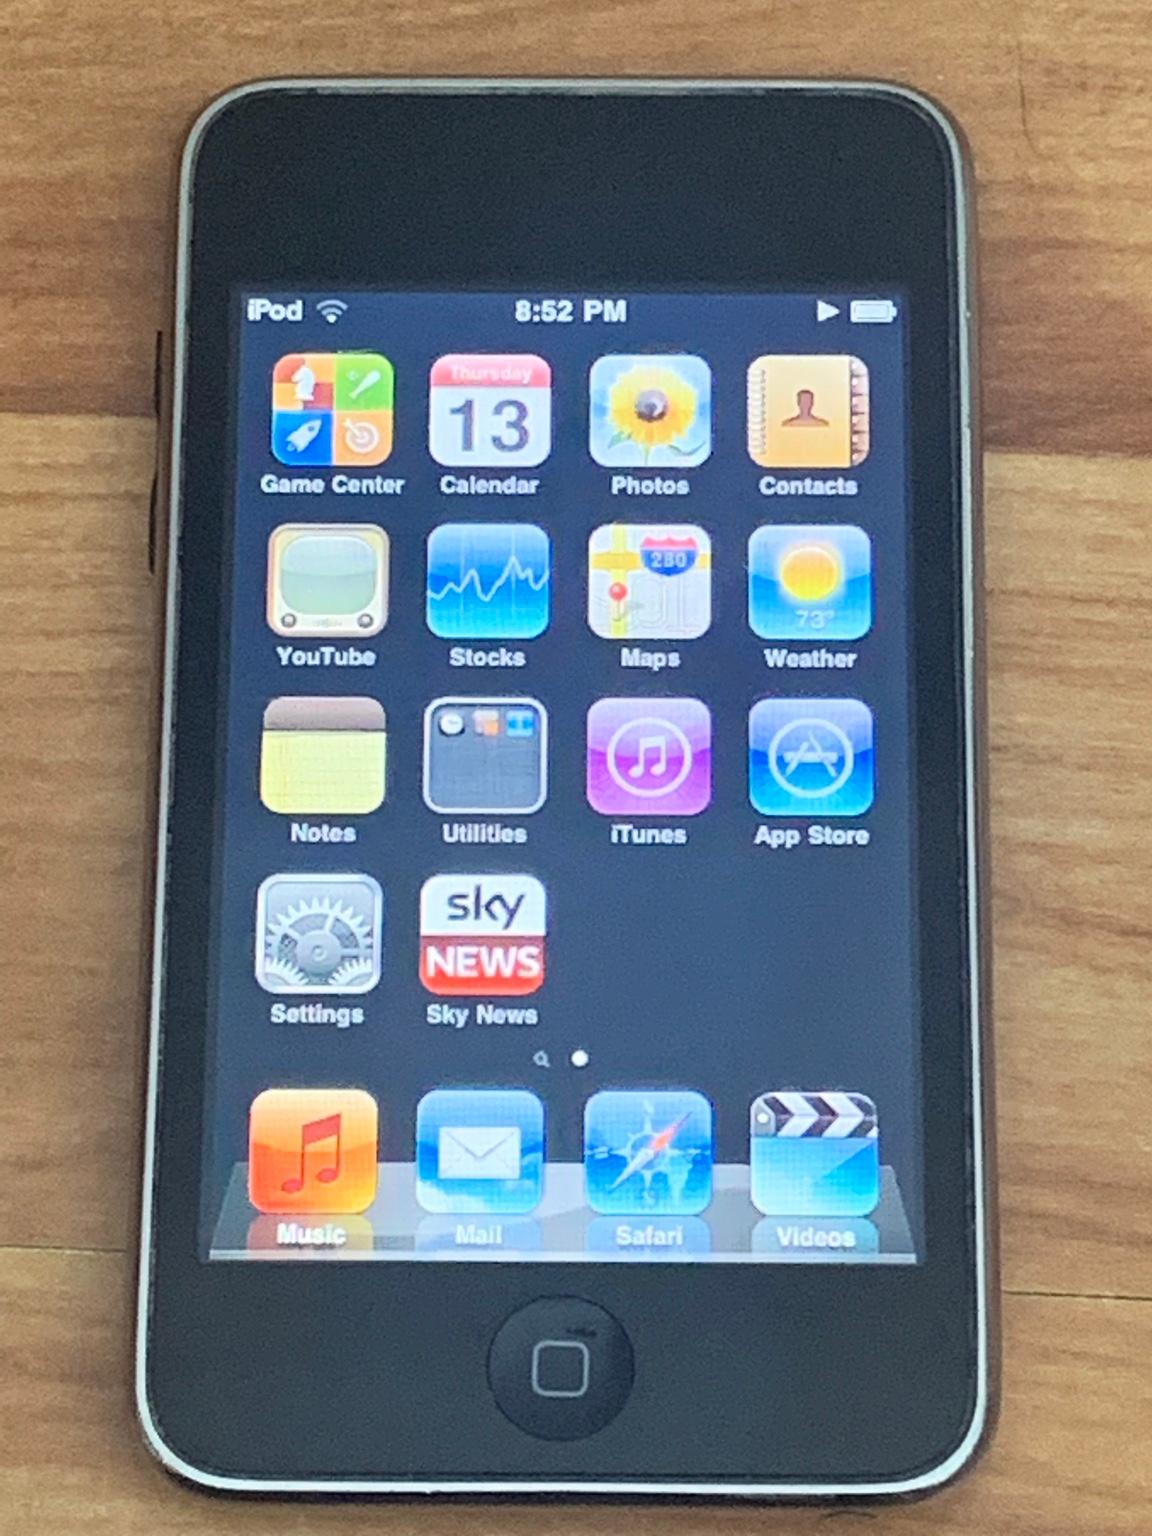 IPOD TOUCH 2nd Generation 8GB. in Stoke-on-Trent for £10.00 for sale